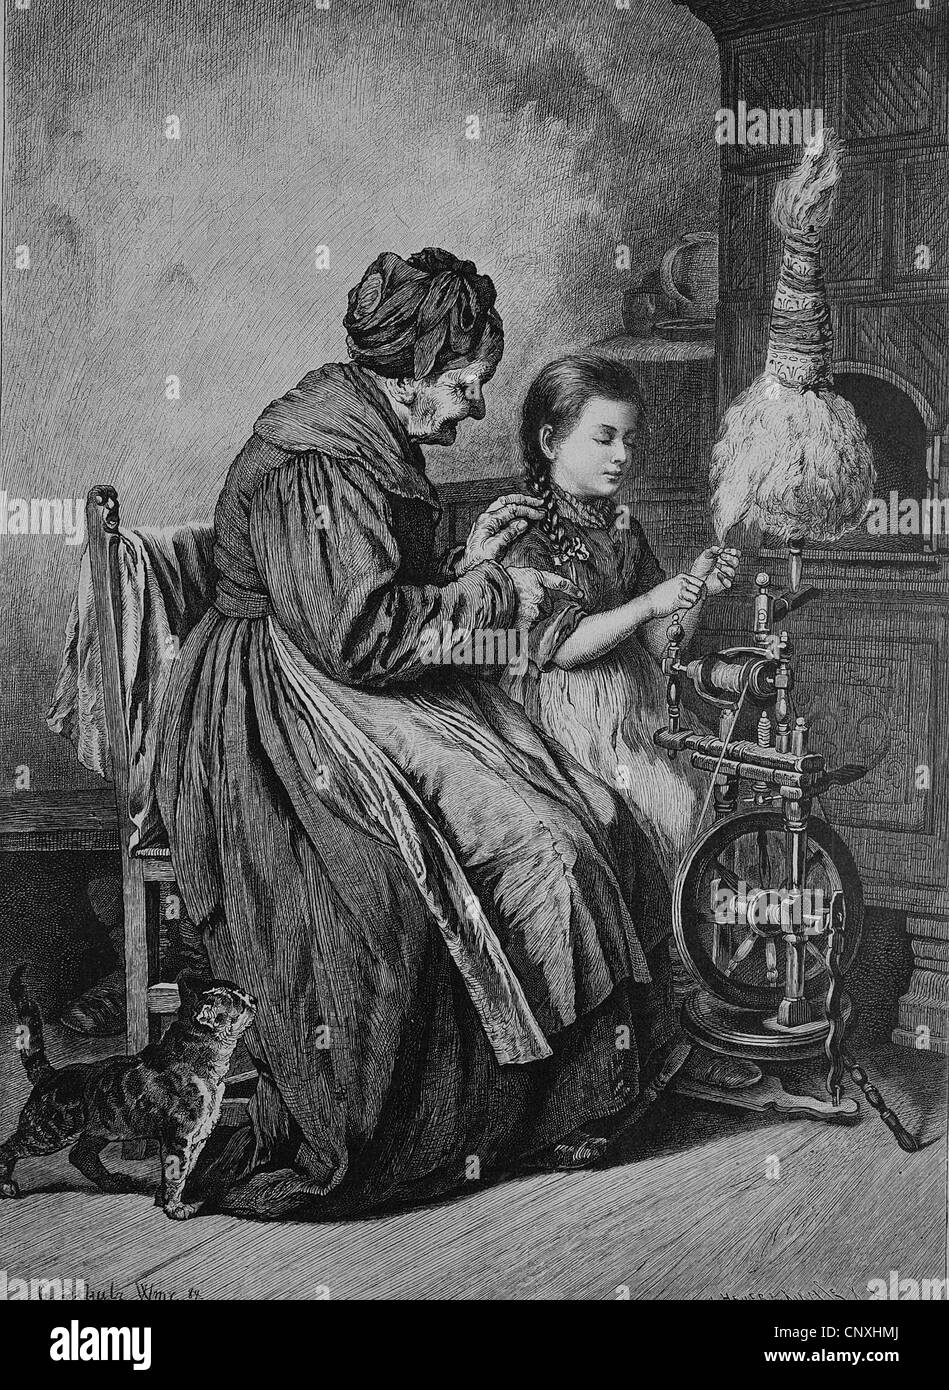 Spinning lessons, historical engraving, 1883 Stock Photo